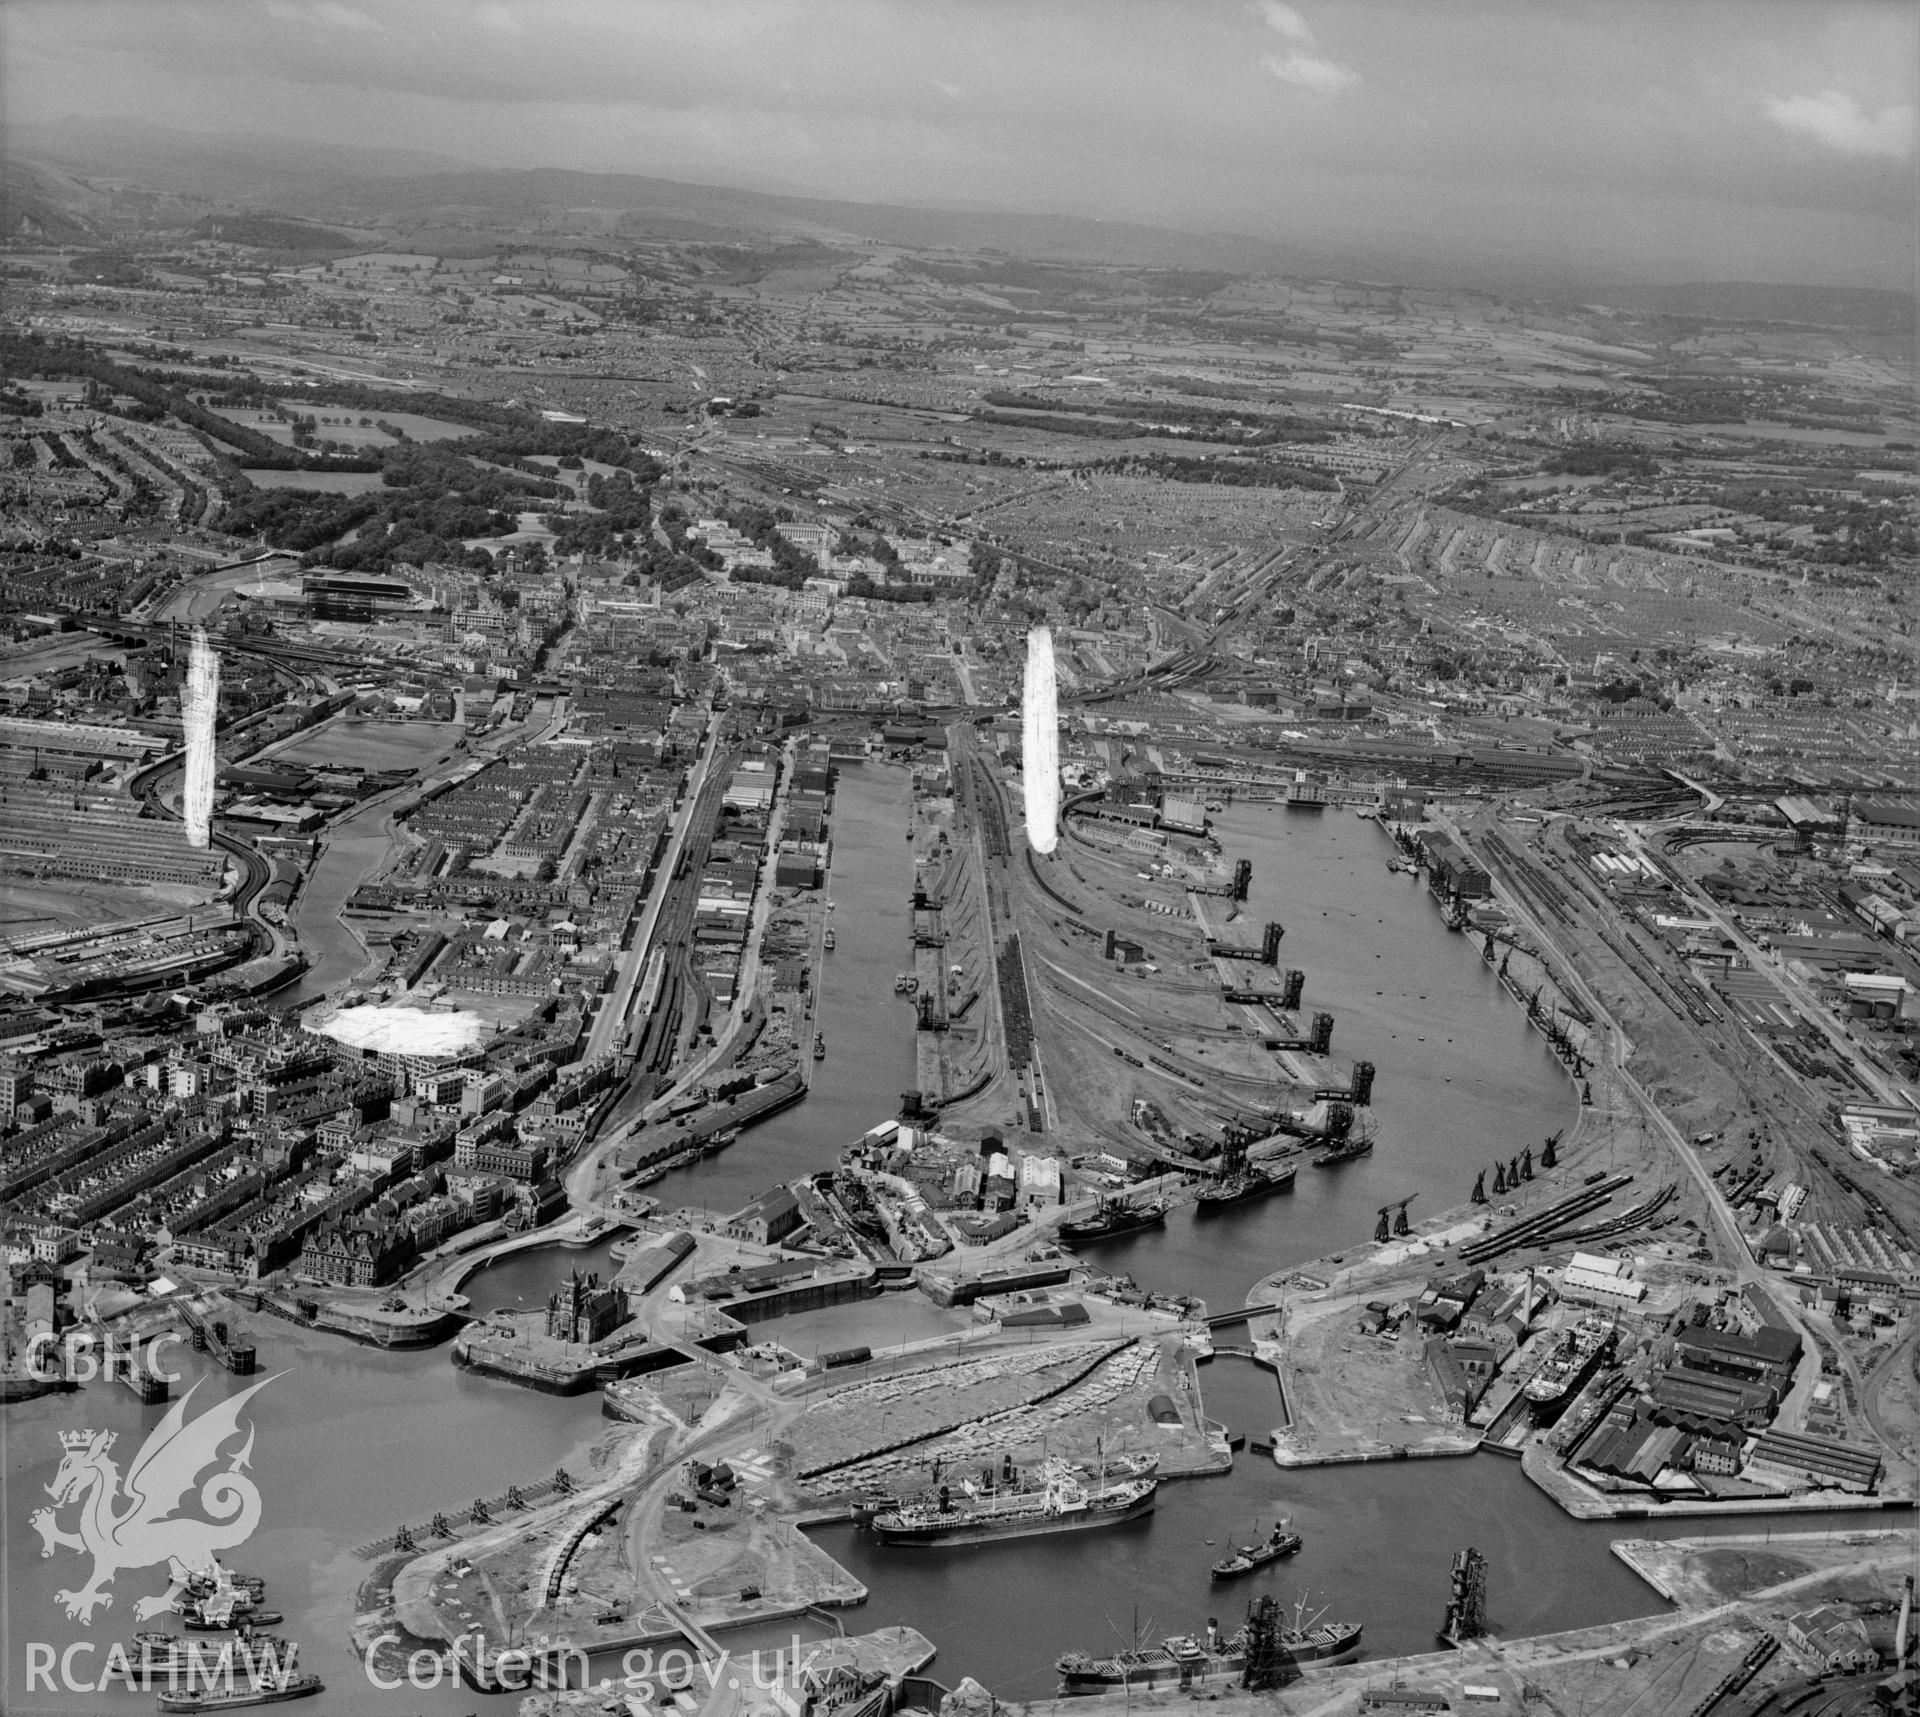 View of Cardiff showing docks